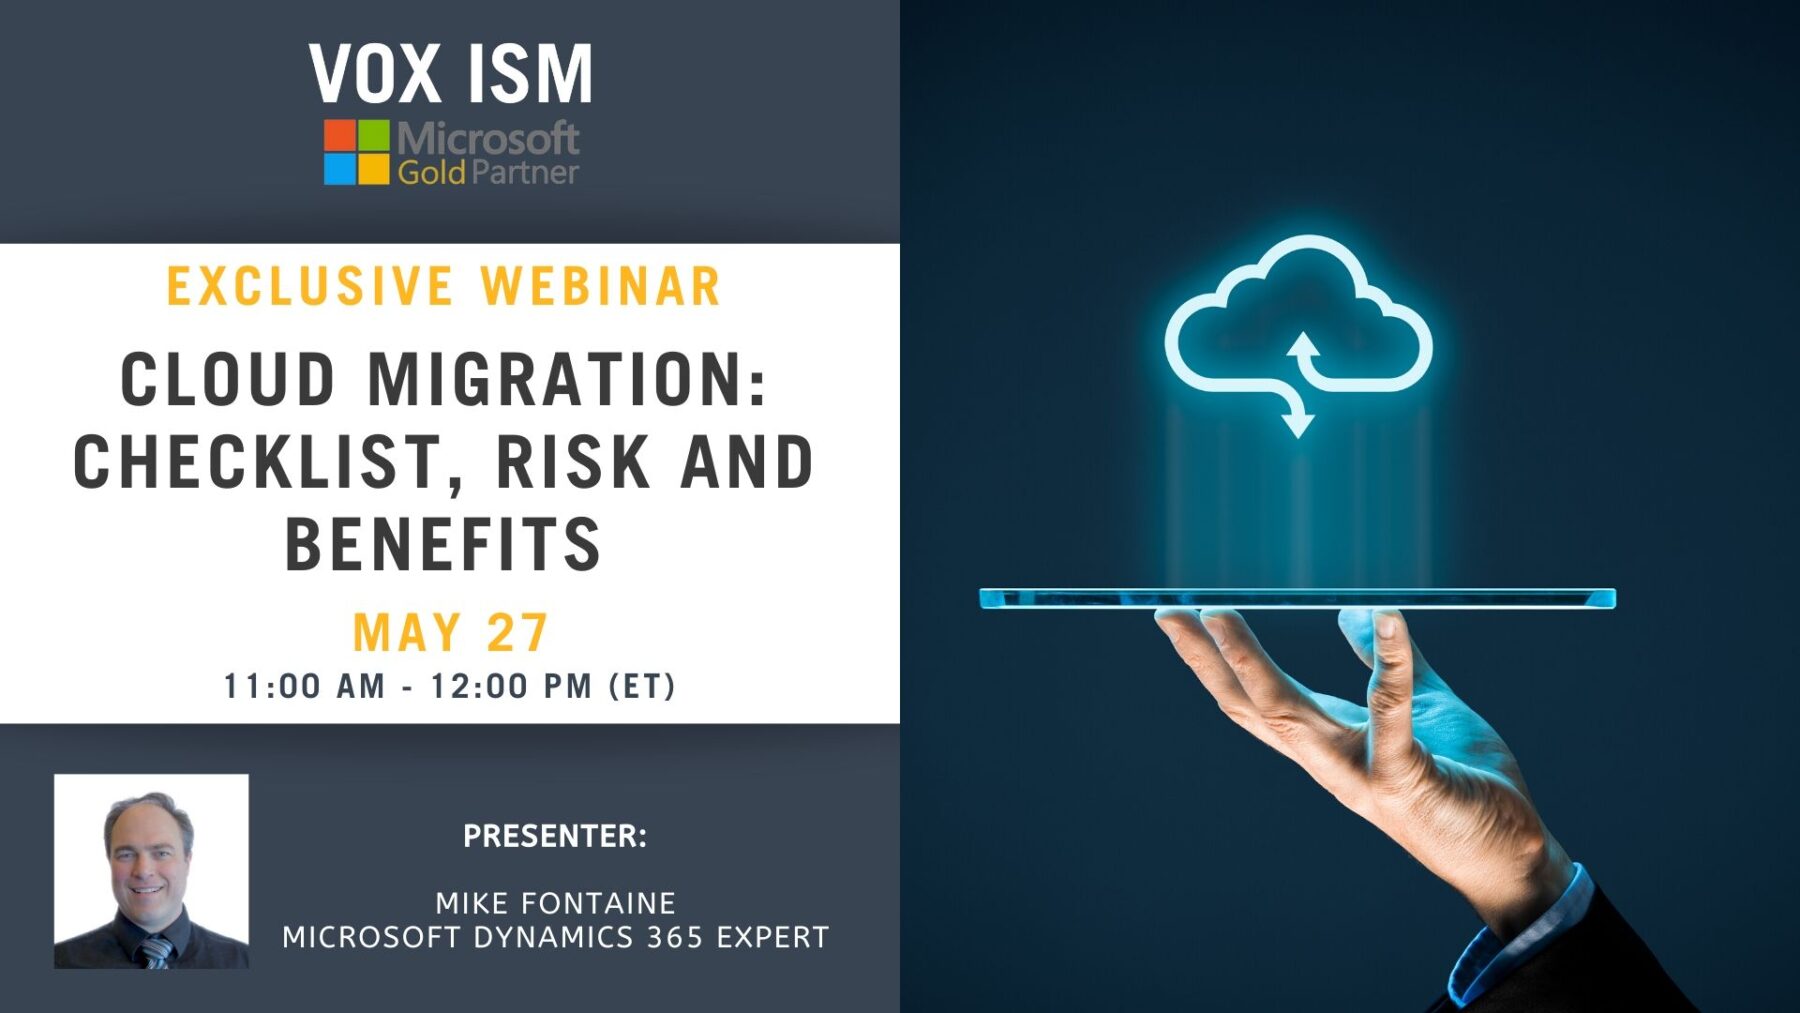 Cloud Migration: Checklist, Risk and Benefits - May 27 - Webinar VOX ISM